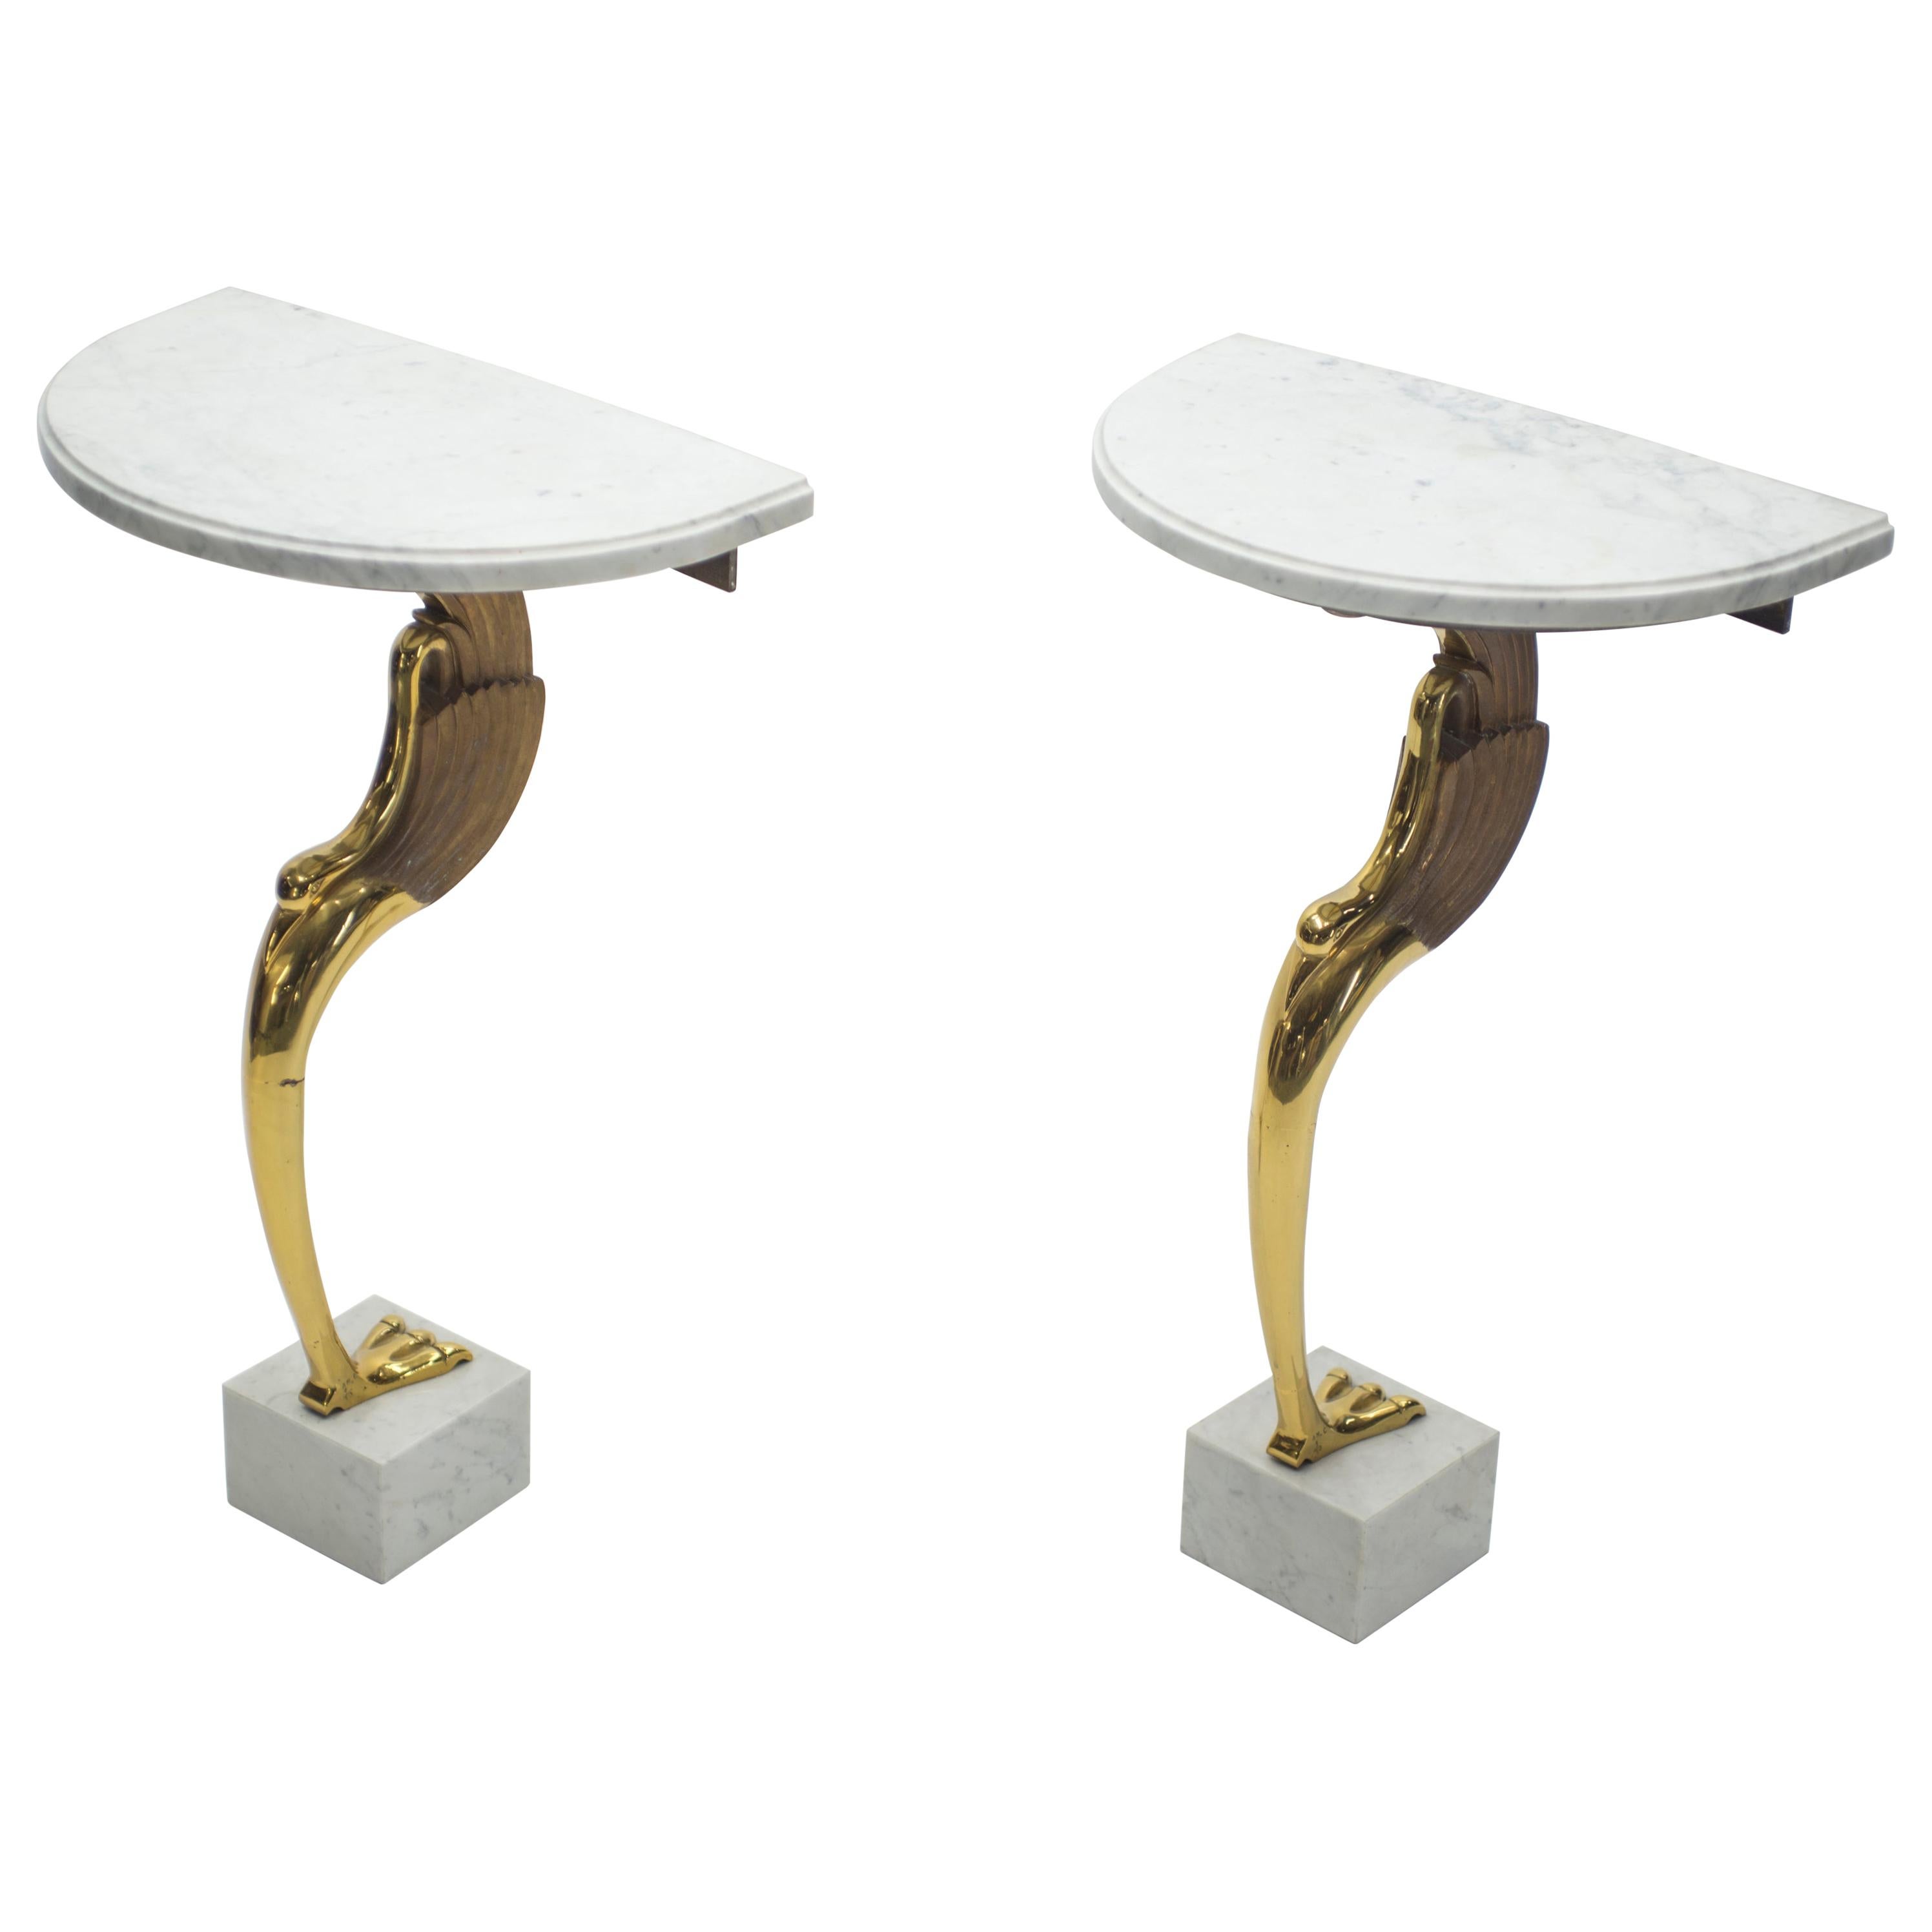 Rare Midcentury Pair of Brass Marble Console Tables Robert Thibier, 1970s